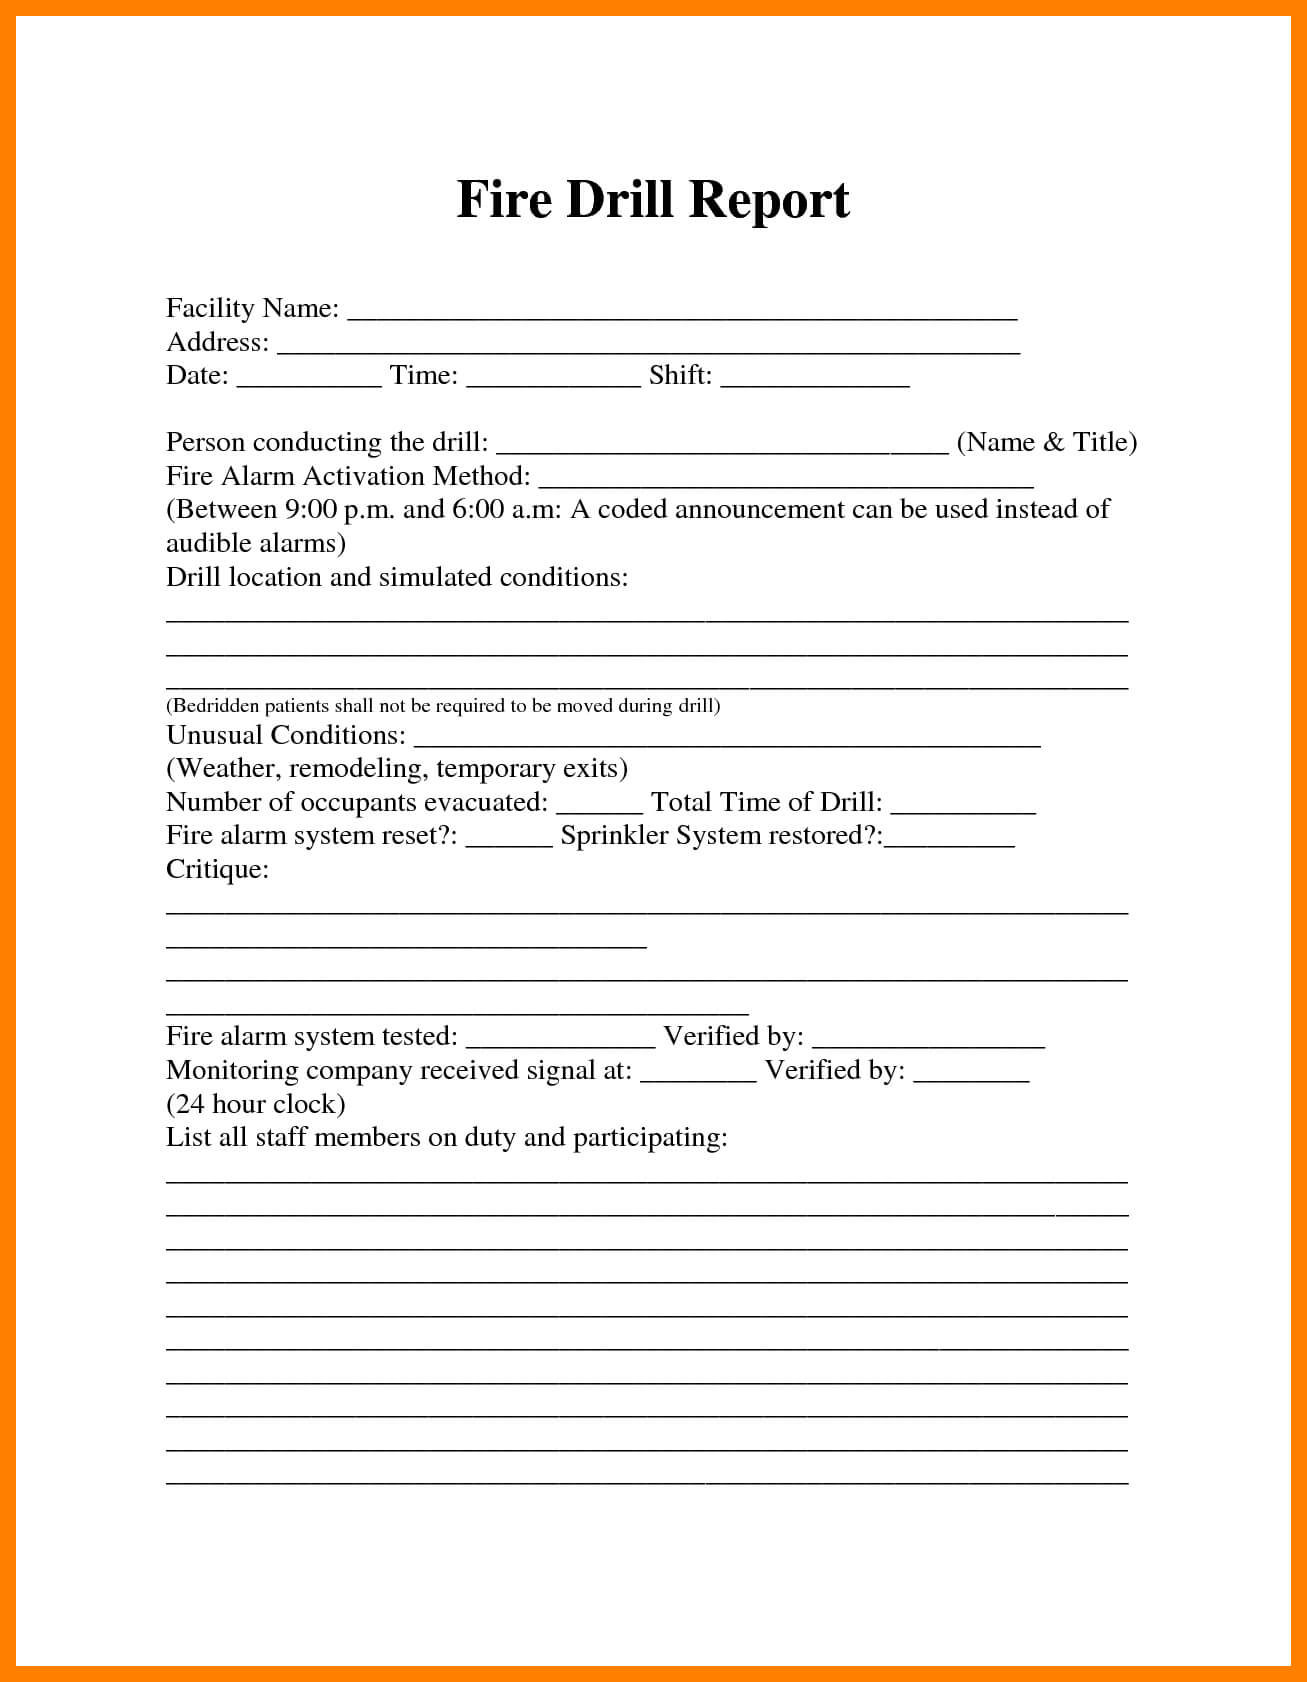 Image Result For Fire Drill Procedures For Summer Camp For Emergency Drill Report Template